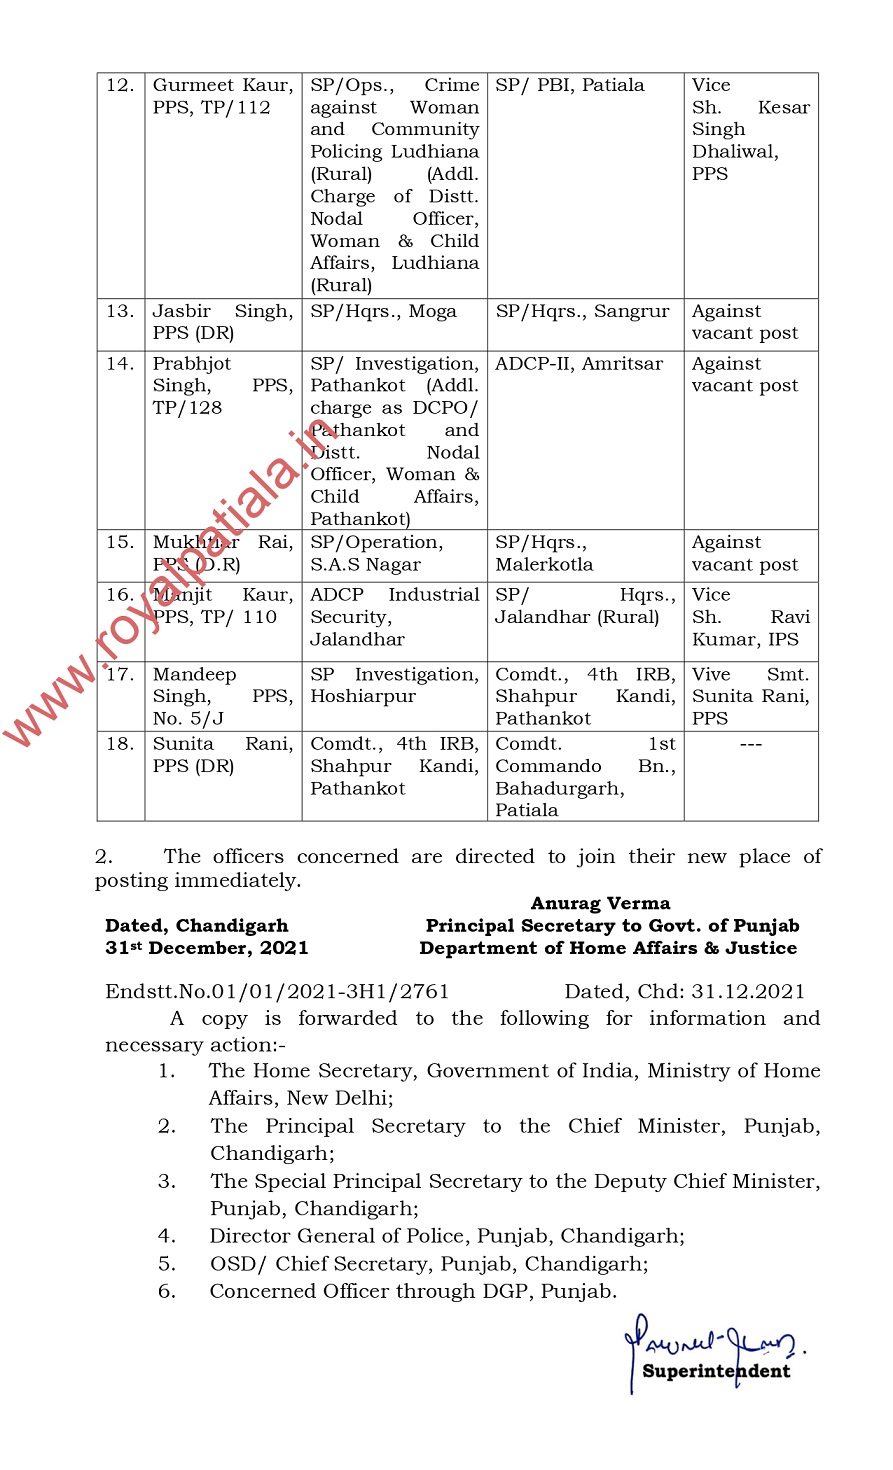 Another round of Punjab police transfers-18 IPS-PPS transferred 